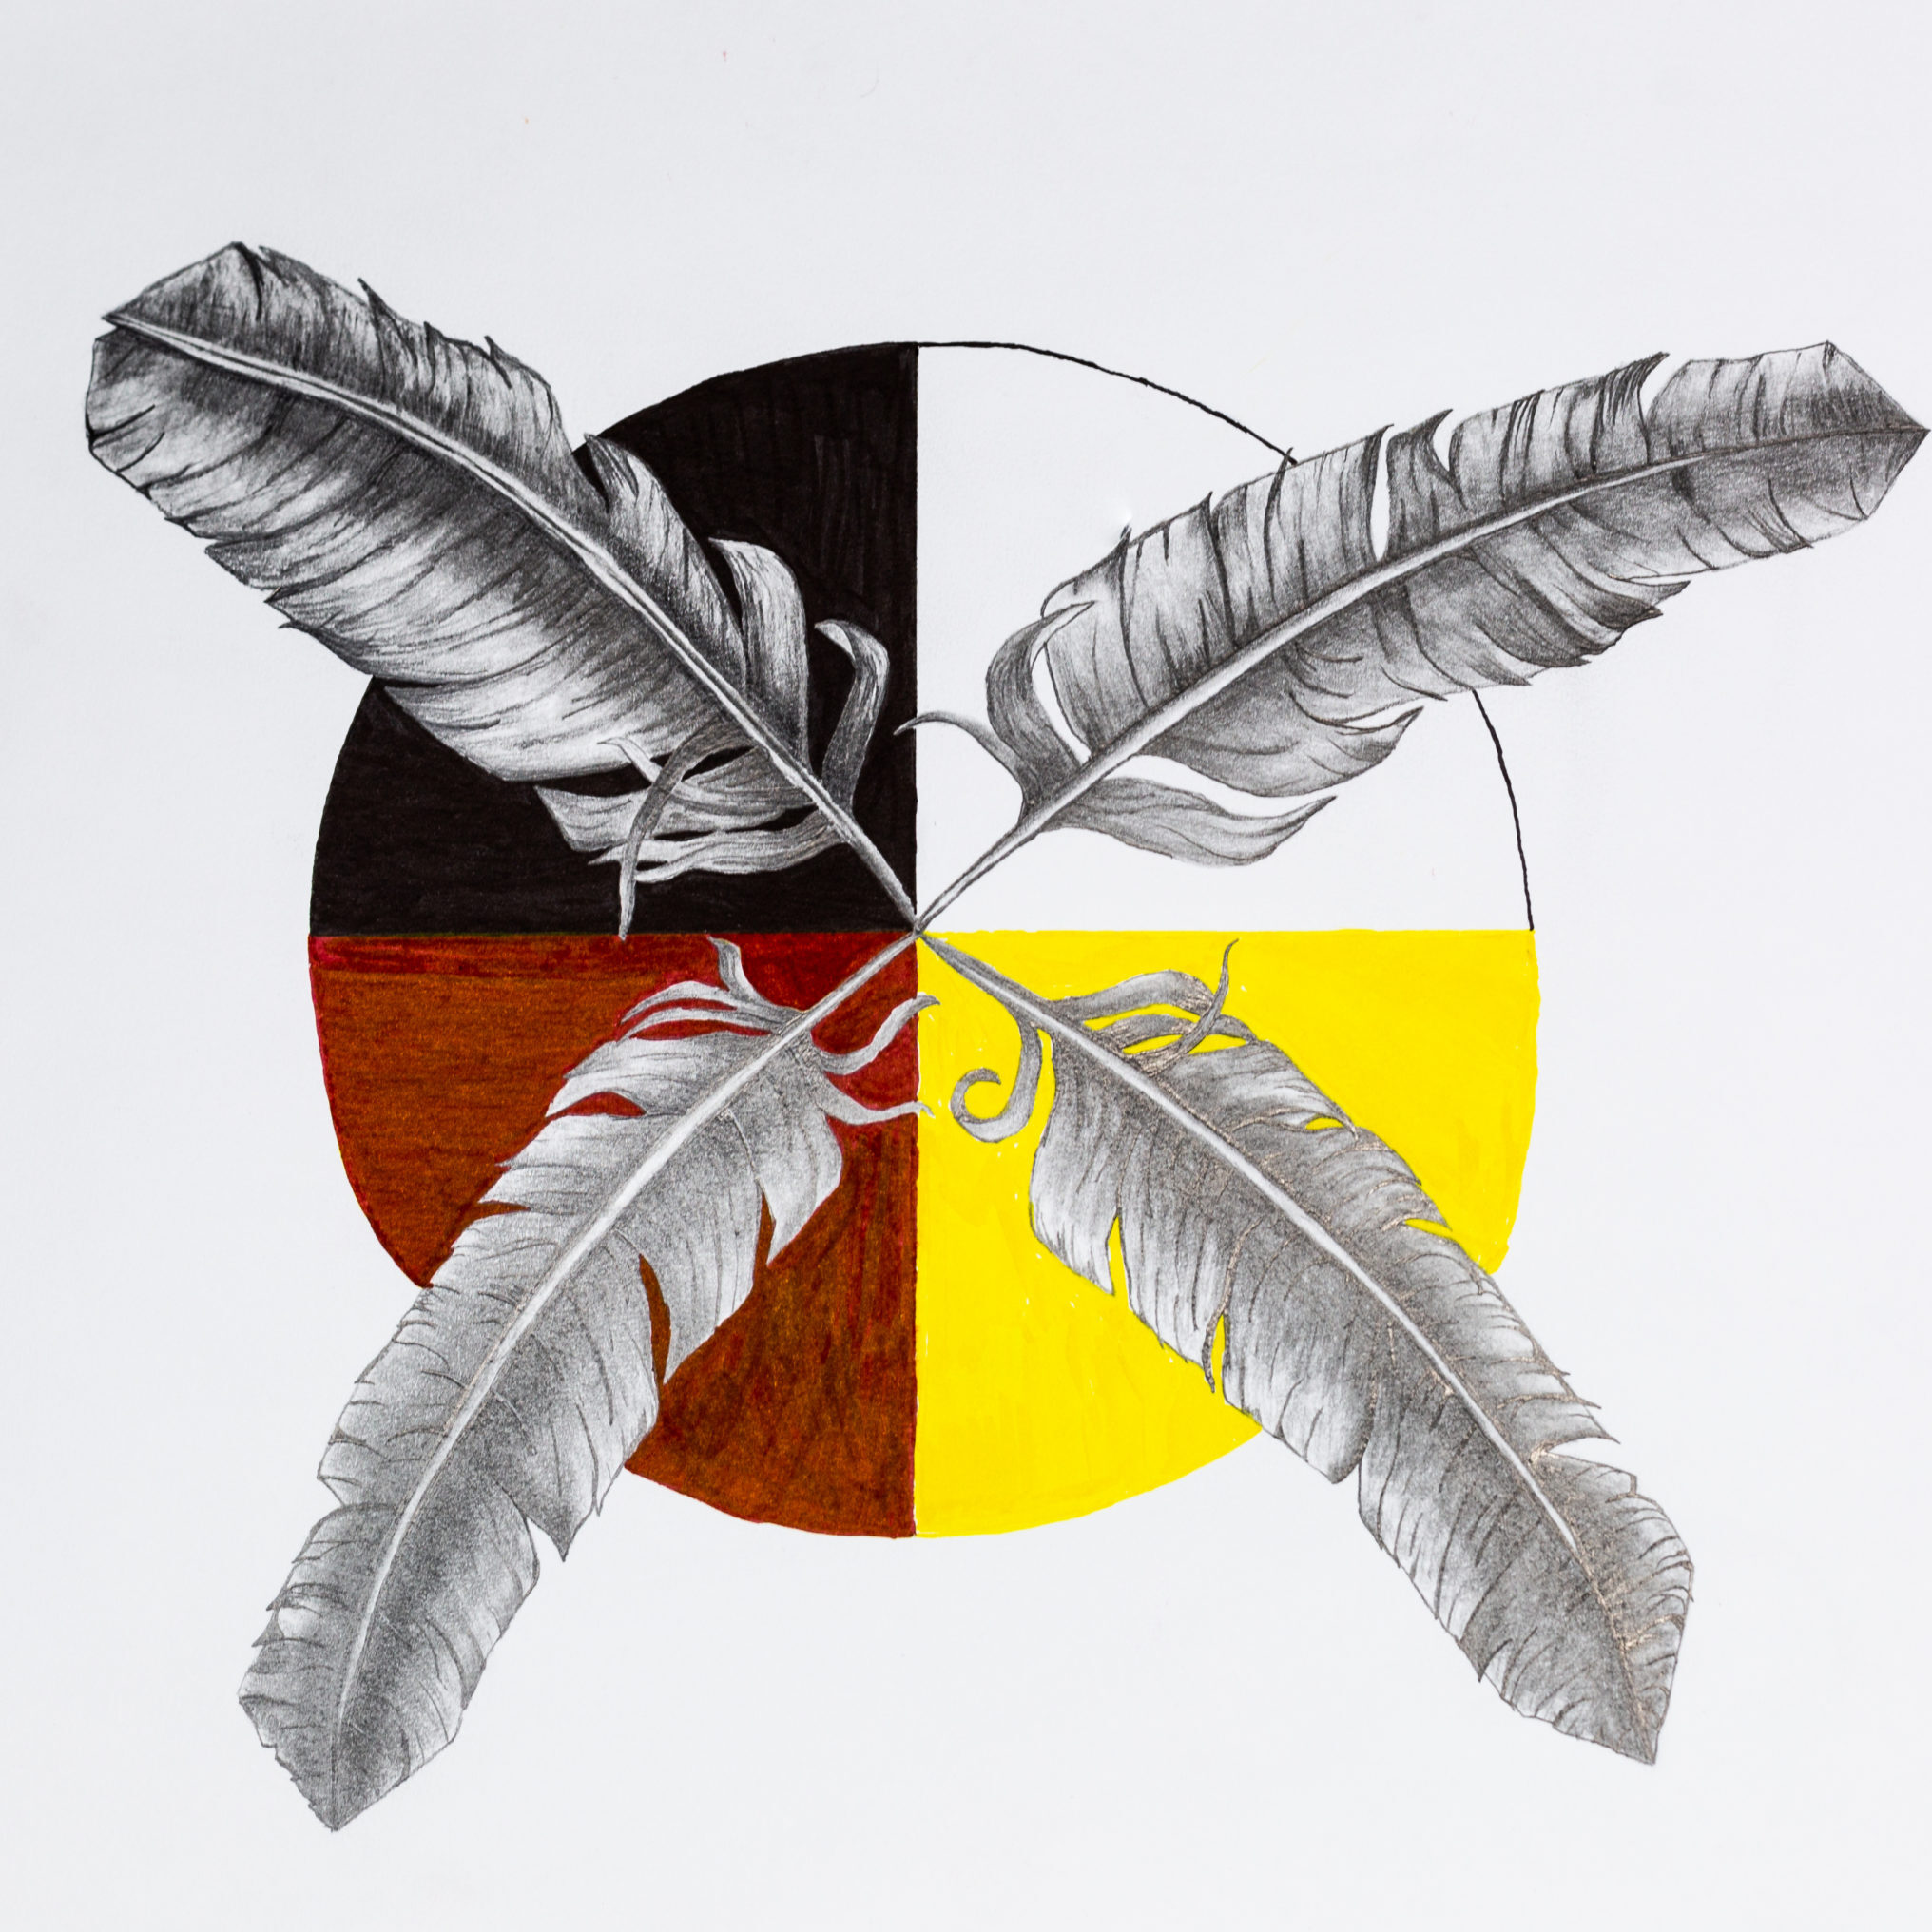 Erin FitzGibbon, photographer, photography, drawing, geometric, graphite, workshop, portraits, visual art, Indigenous Artist, First Nations, Indigenous Arts Collective of Canada, Pass The Feather